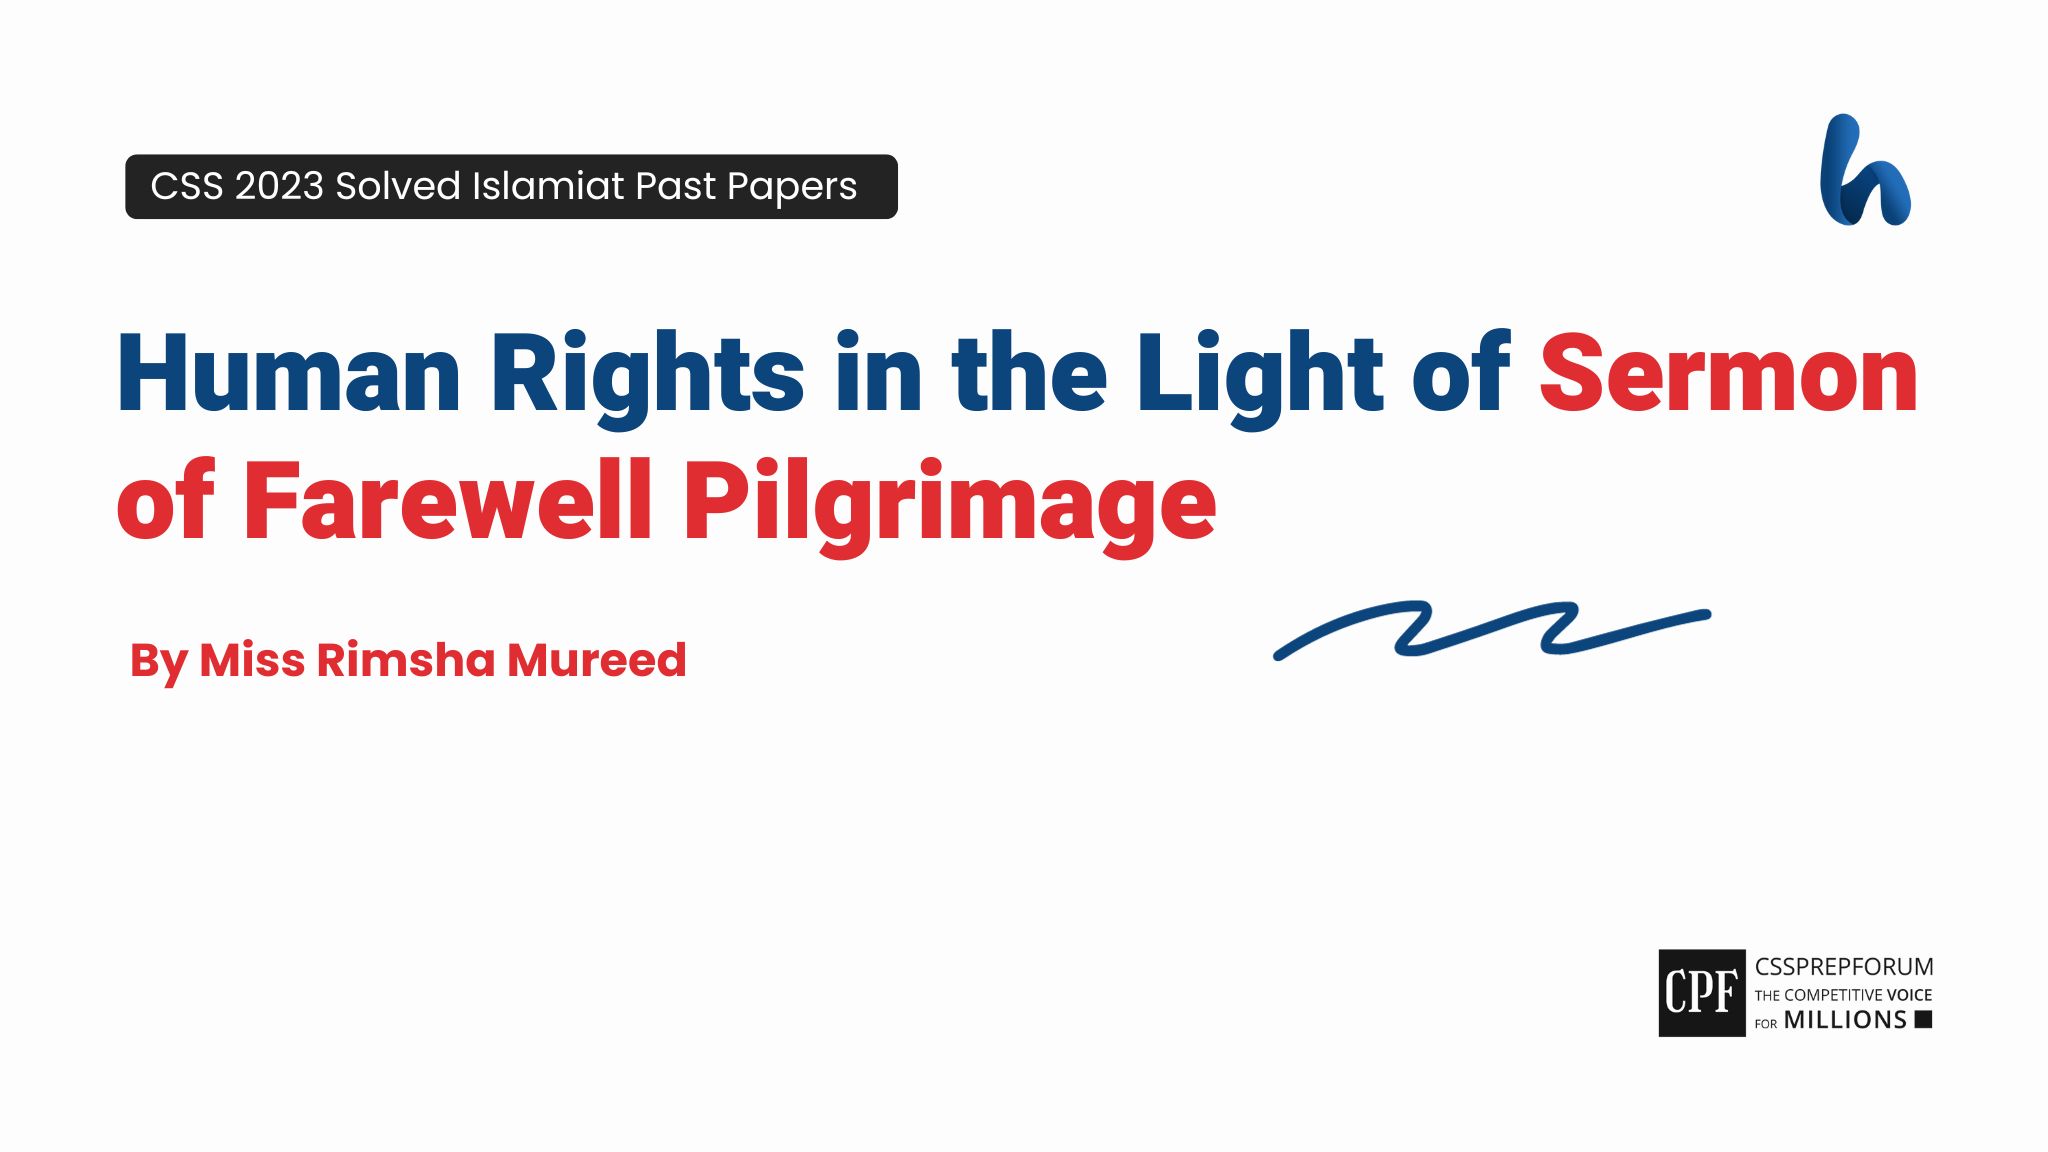 Human Rights in the Light of Sermon of Farewell Pilgrimage